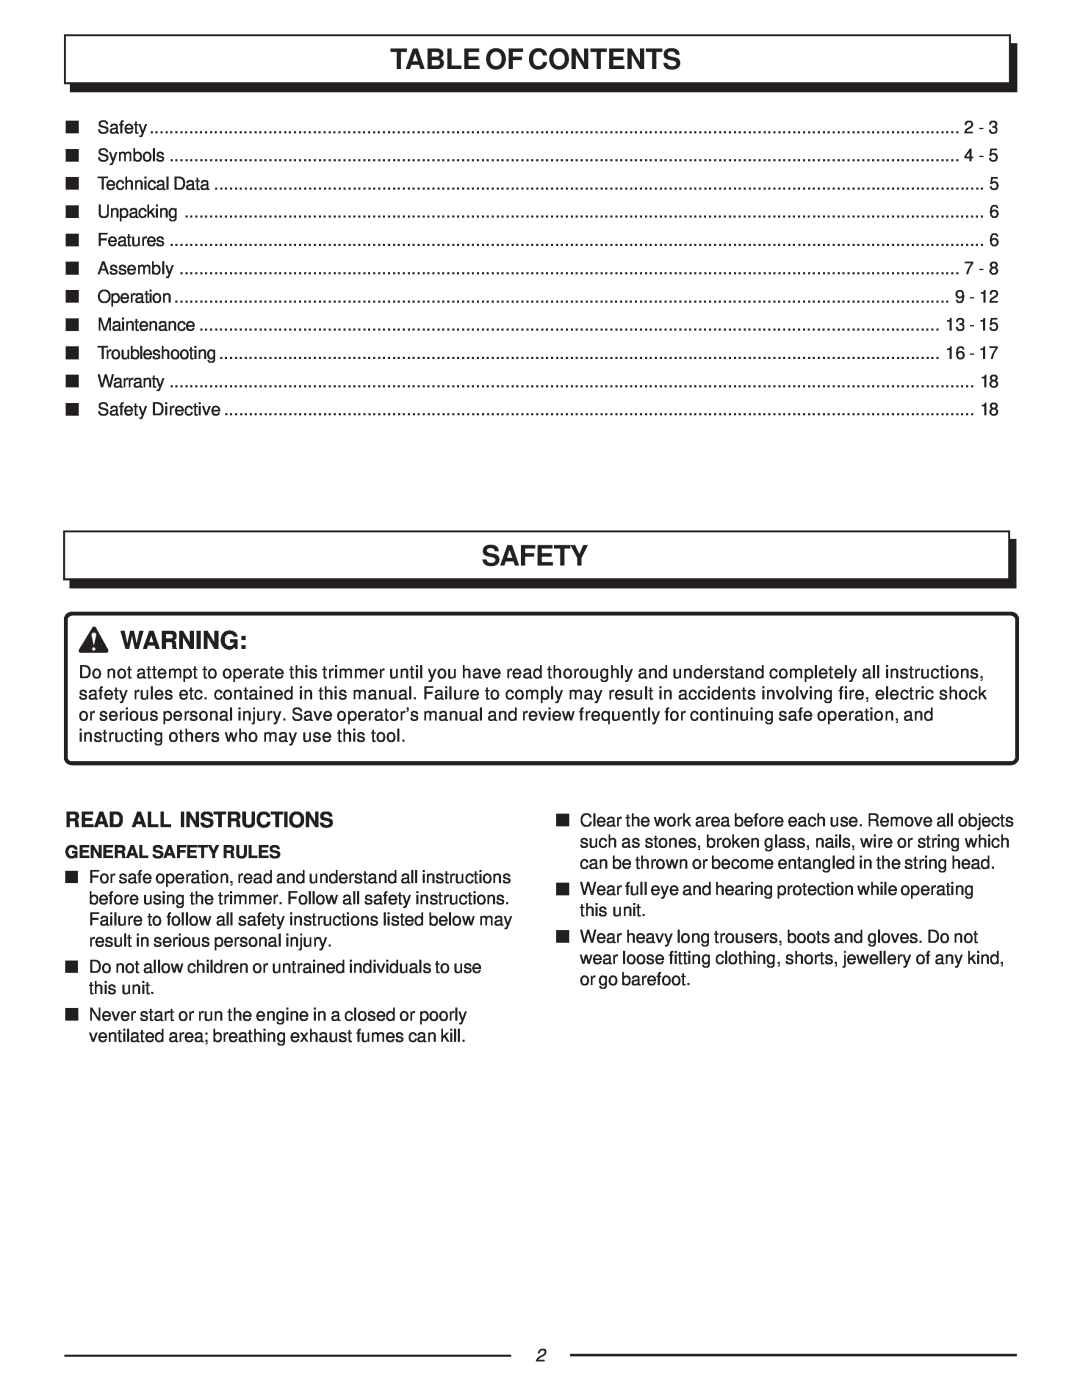 Homelite F2035, UT70123 manual Read All Instructions, General Safety Rules, Table Of Contents 